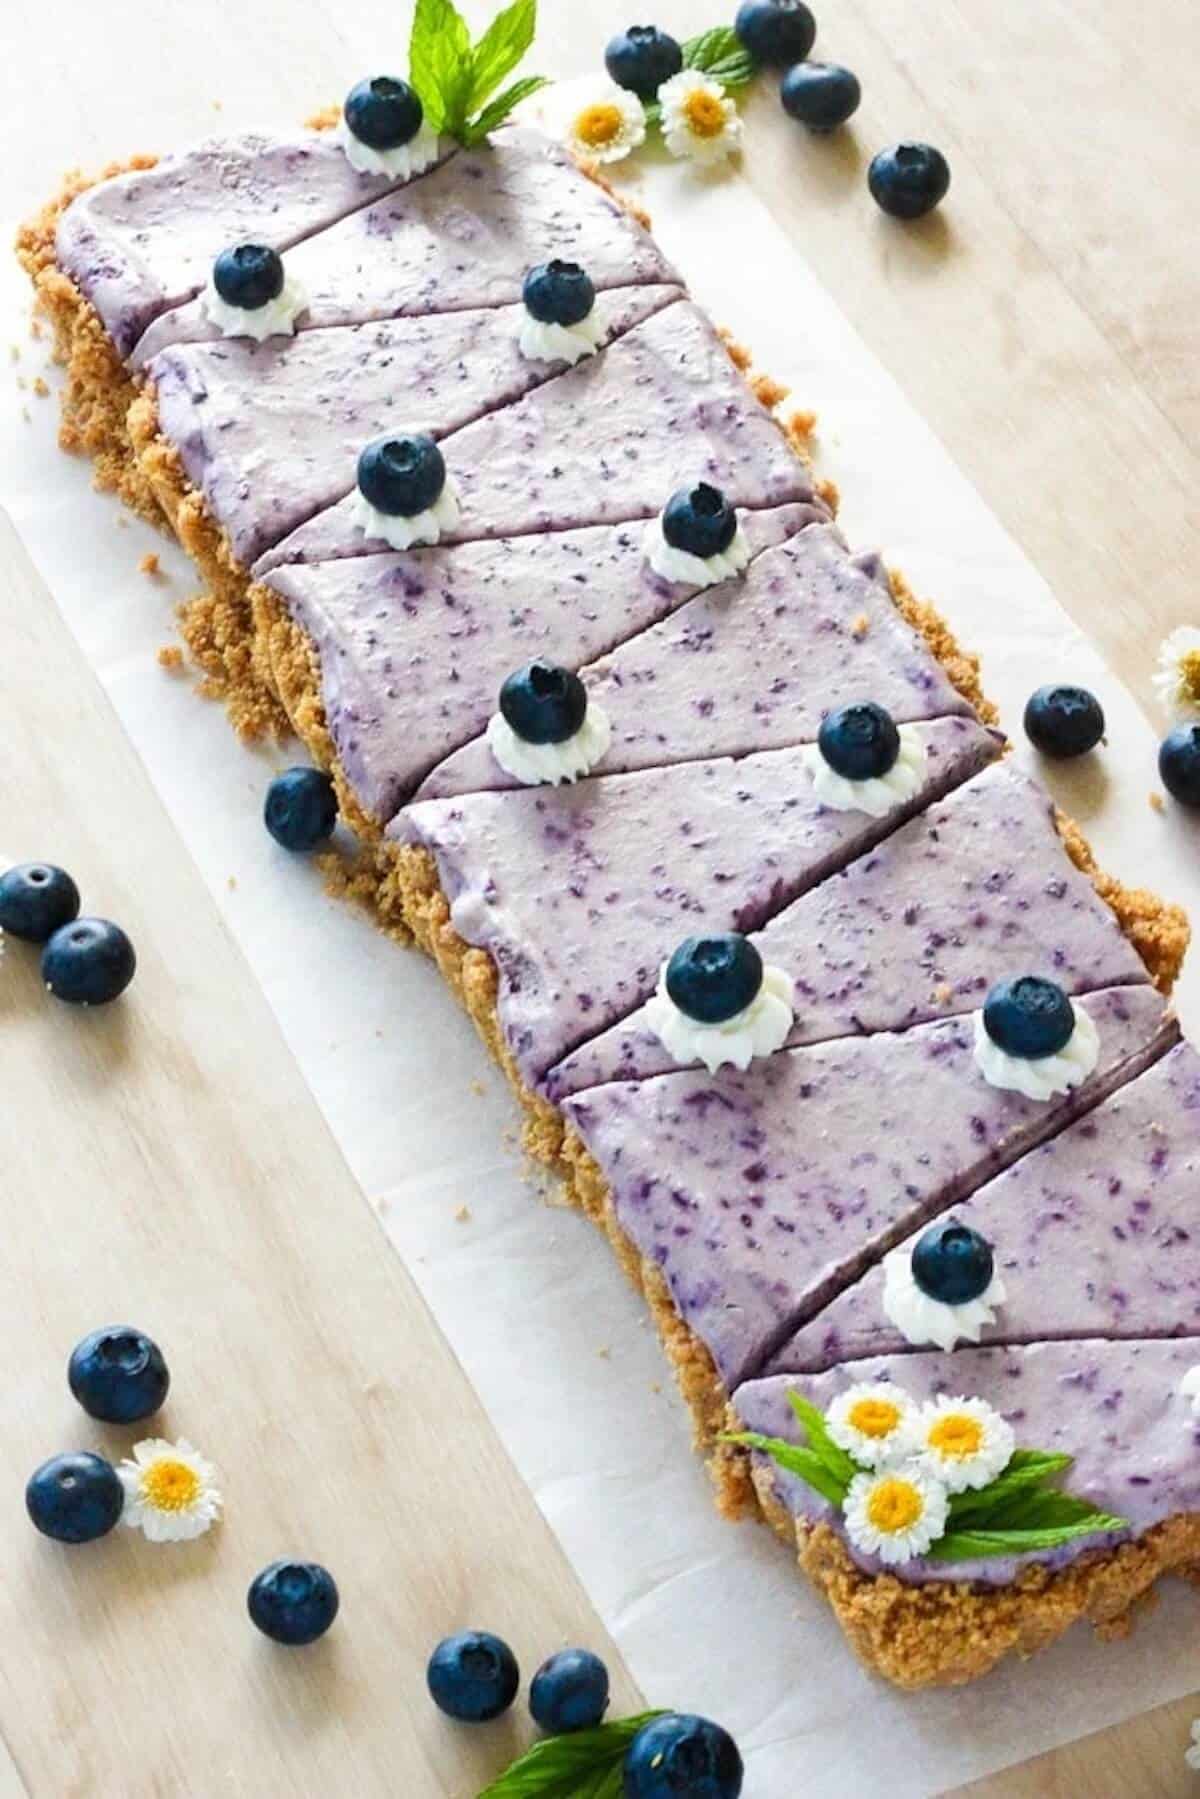 A serving platter with slices of blueberry cheesecake.